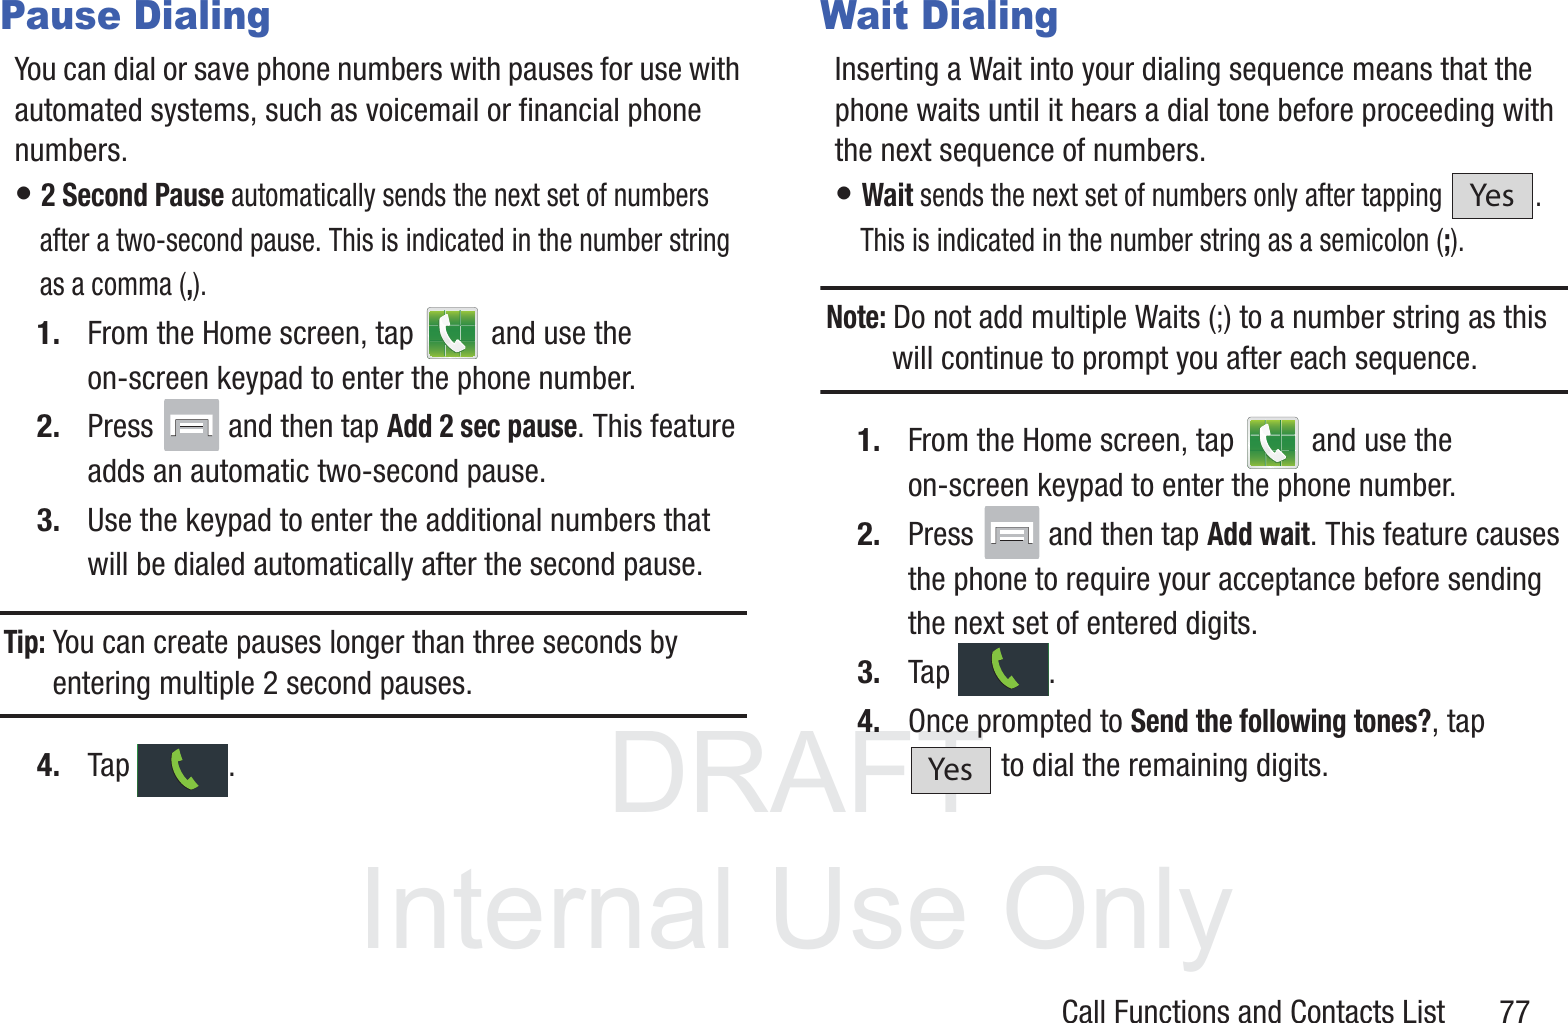 DRAFT InternalUse OnlyCall Functions and Contacts List       77Pause DialingYou can dial or save phone numbers with pauses for use with automated systems, such as voicemail or financial phone numbers.• 2 Second Pause automatically sends the next set of numbers after a two-second pause. This is indicated in the number string as a comma (,).1. From the Home screen, tap   and use the on-screen keypad to enter the phone number.2. Press   and then tap Add 2 sec pause. This feature adds an automatic two-second pause.3. Use the keypad to enter the additional numbers that will be dialed automatically after the second pause.Tip: You can create pauses longer than three seconds by entering multiple 2 second pauses.4. Tap .Wait DialingInserting a Wait into your dialing sequence means that the phone waits until it hears a dial tone before proceeding with the next sequence of numbers.• Wait sends the next set of numbers only after tapping  . This is indicated in the number string as a semicolon (;).Note: Do not add multiple Waits (;) to a number string as this will continue to prompt you after each sequence.1. From the Home screen, tap   and use the on-screen keypad to enter the phone number.2. Press   and then tap Add wait. This feature causes the phone to require your acceptance before sending the next set of entered digits.3. Tap .4. Once prompted to Send the following tones?, tap  to dial the remaining digits.YesYes